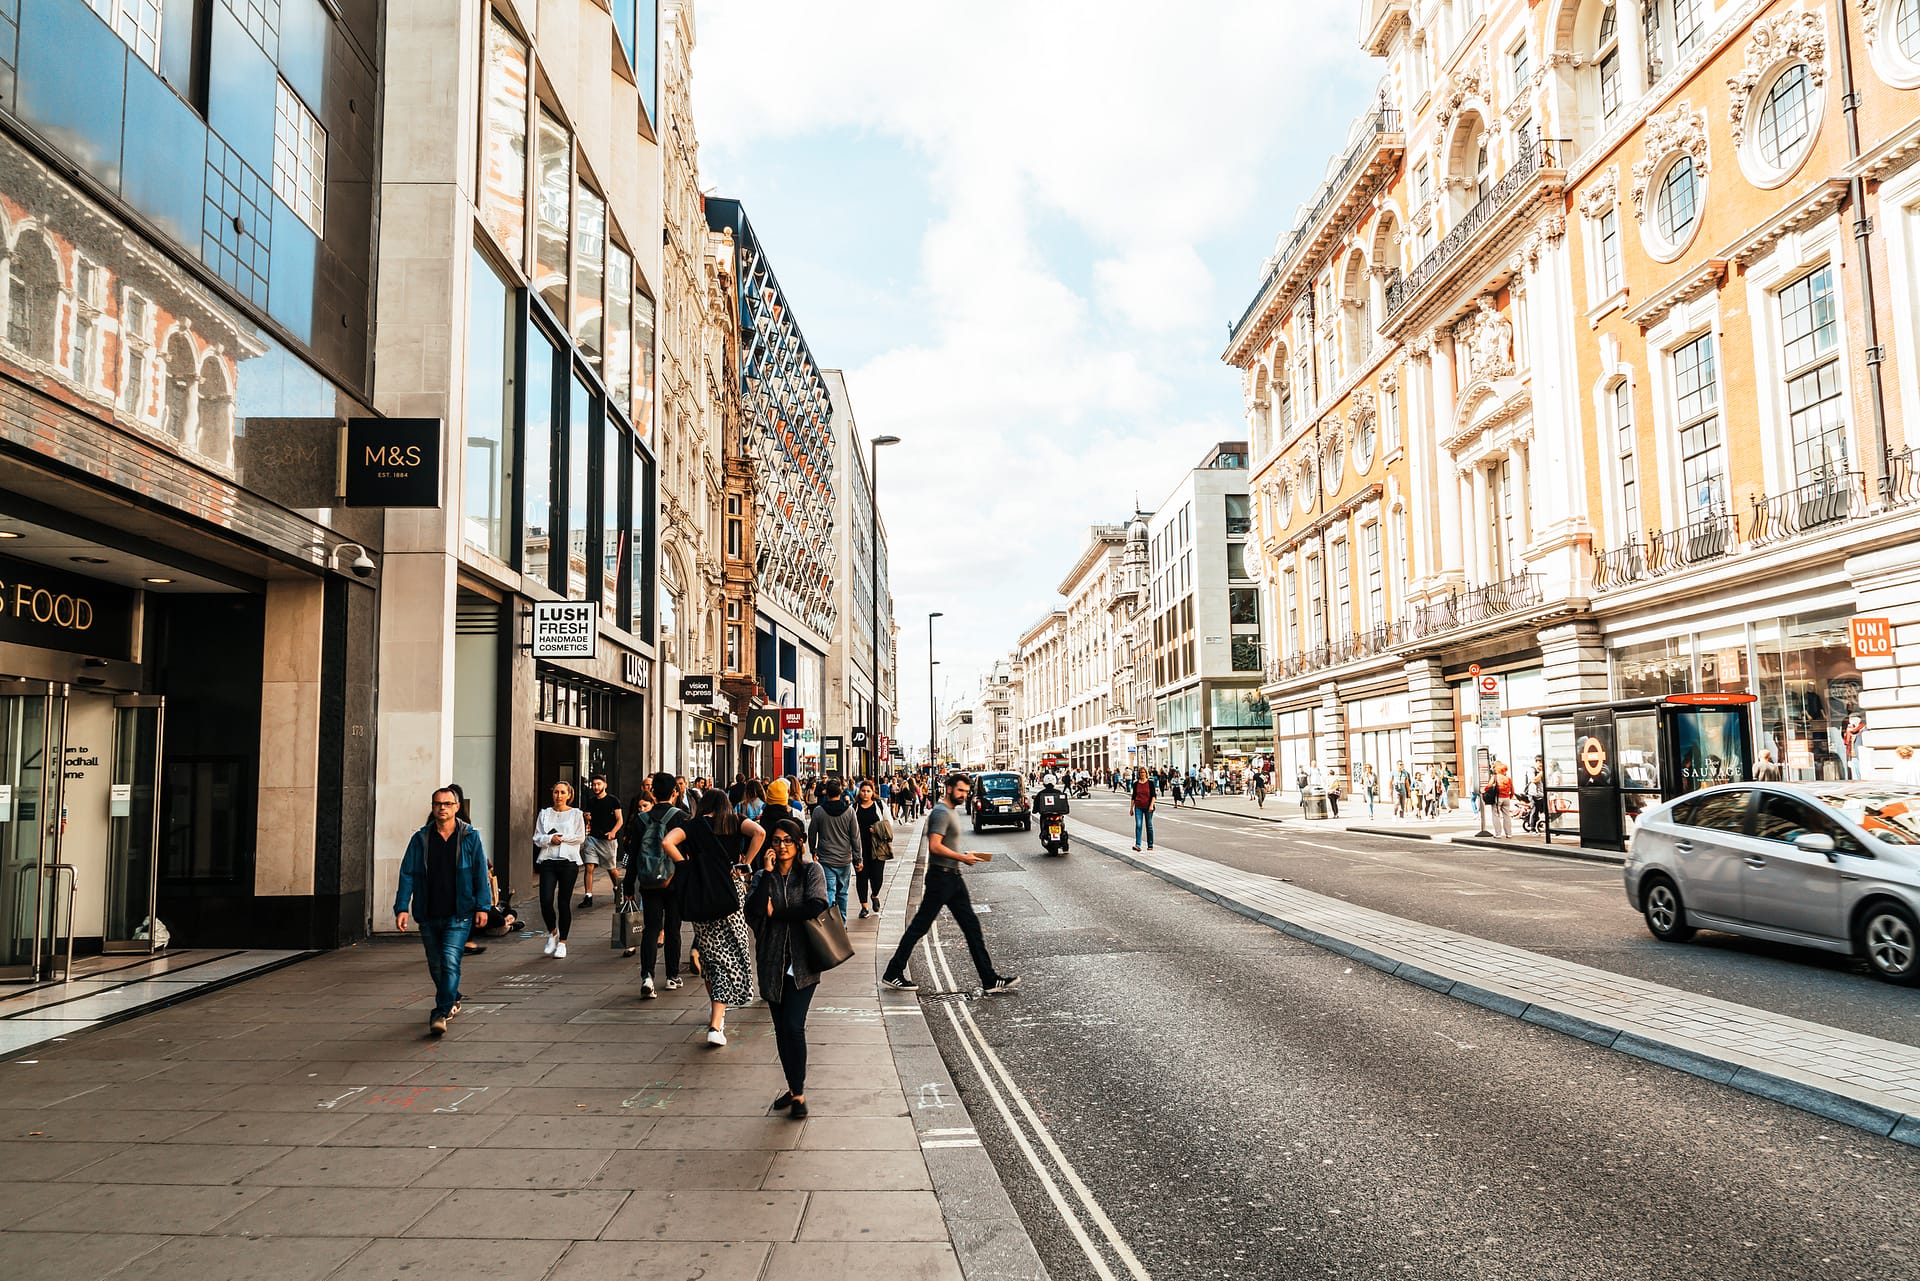 London, England -2 SEP 2019 : The famous Oxford Circus with Oxford Street and Regent Street on a busy day in London, United Kingdom